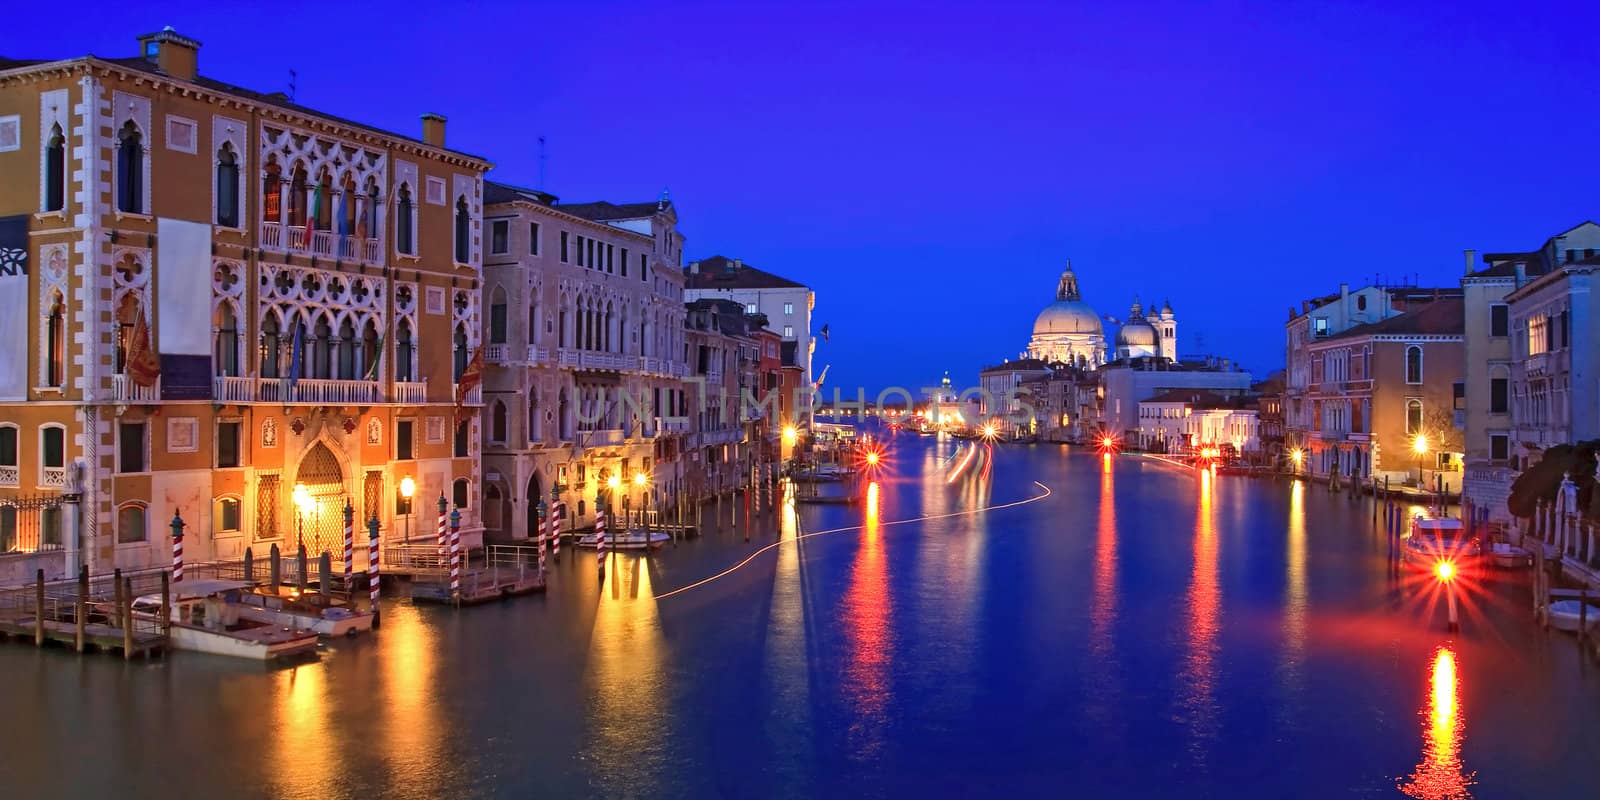 Grand canal Venice Italy. by vichie81